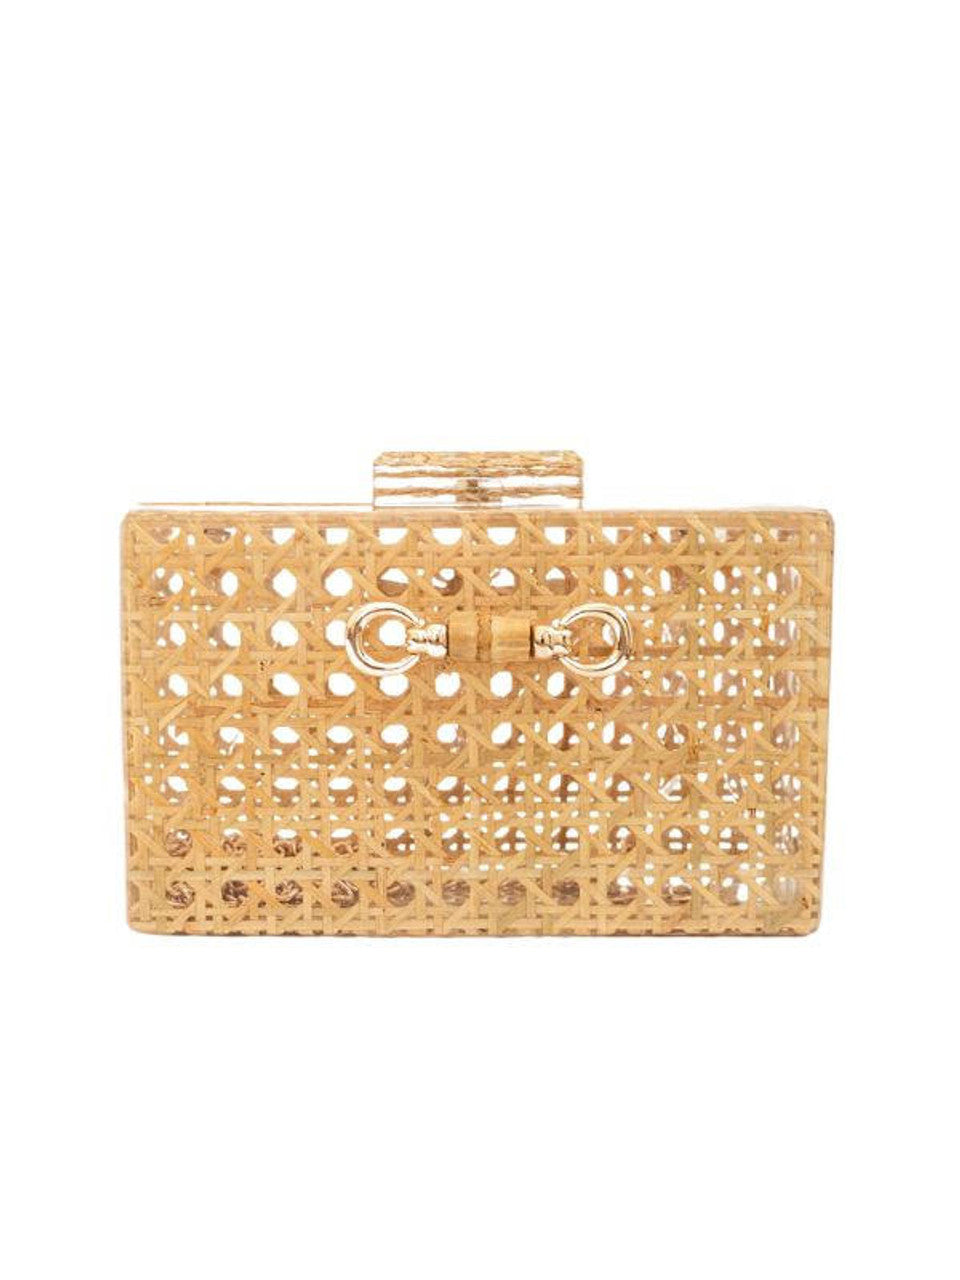 Breakers Clutch - Bamboo Toggle - Natural